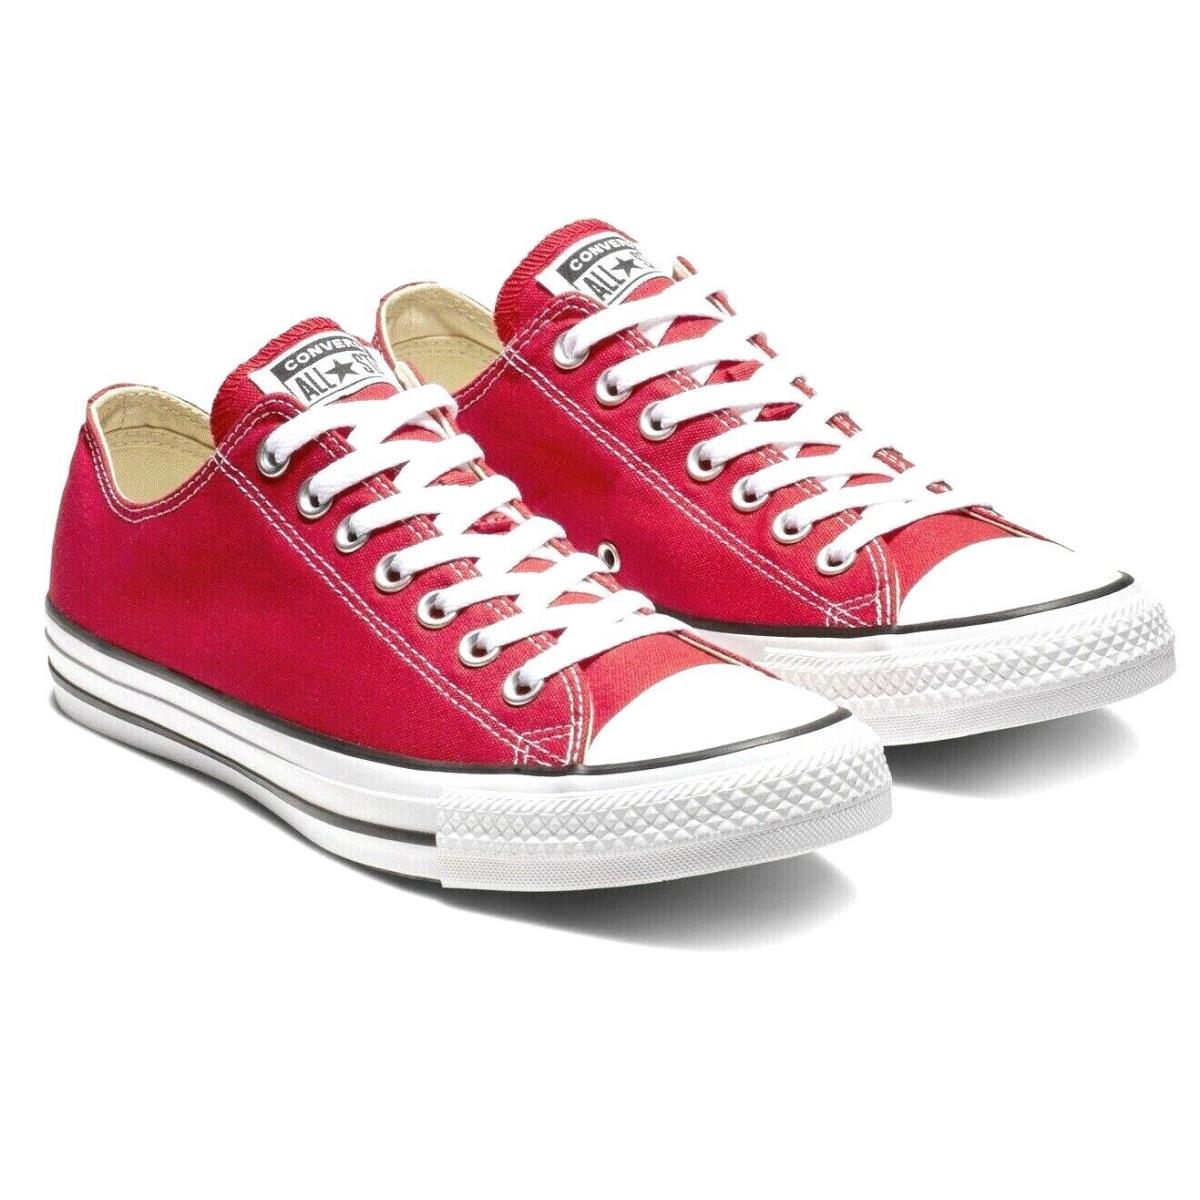 Classic Converse Unisex Chuck Taylor All Star Low Sneaker Canvas Upper Mens Size Red